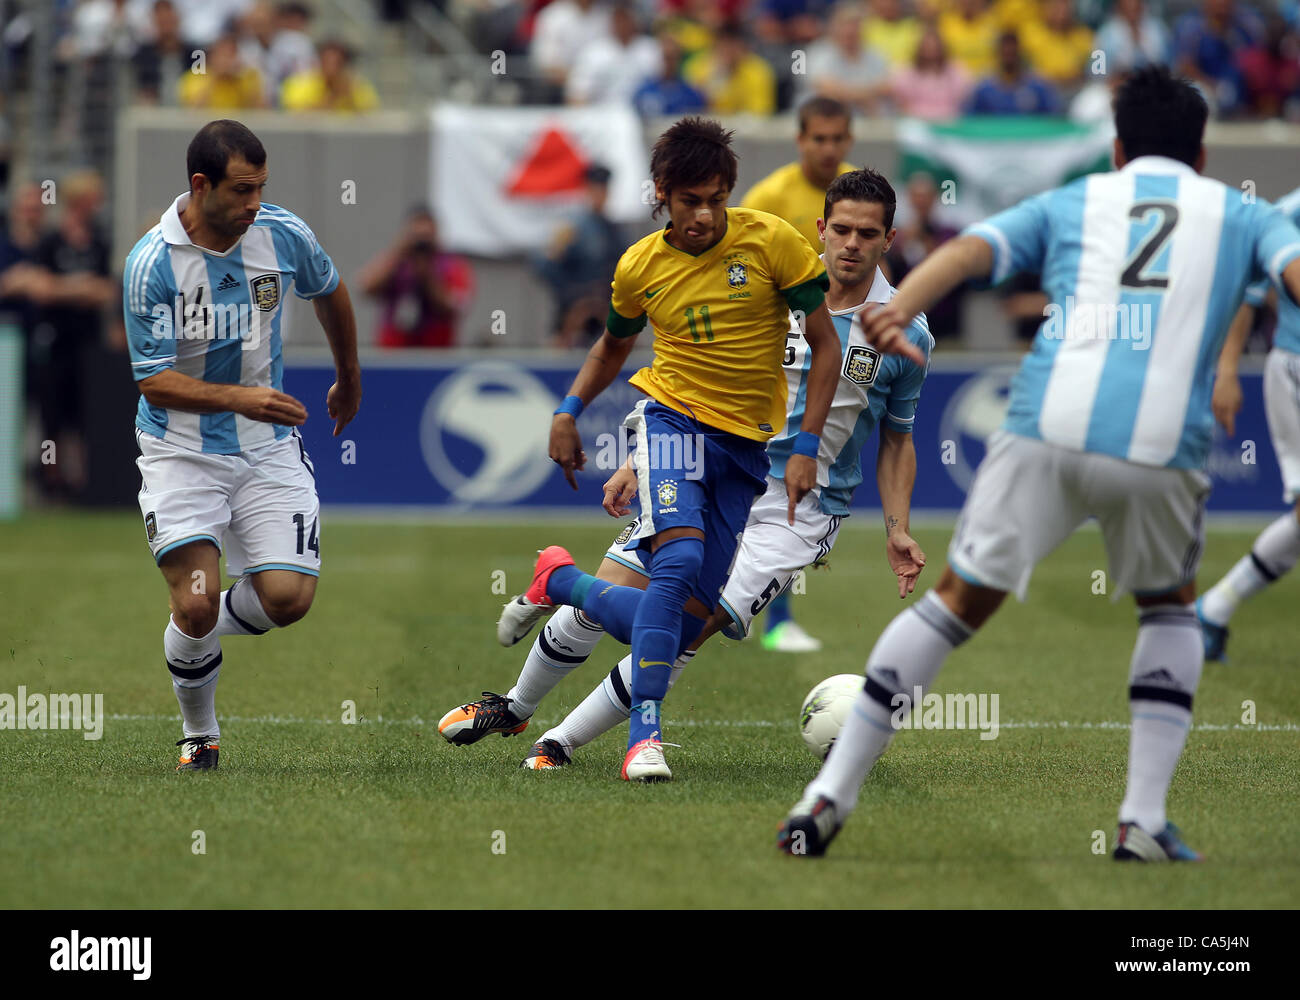 09.06.2012. New Jersey, USA. Fernando Gago (5) and Javier Mascherano (14) of Argentina track Neymar (11) of Brazil during an international friendly match at Metlife Stadium in East Rutherford, New Jersey. Argentina won 4-3. Stock Photo